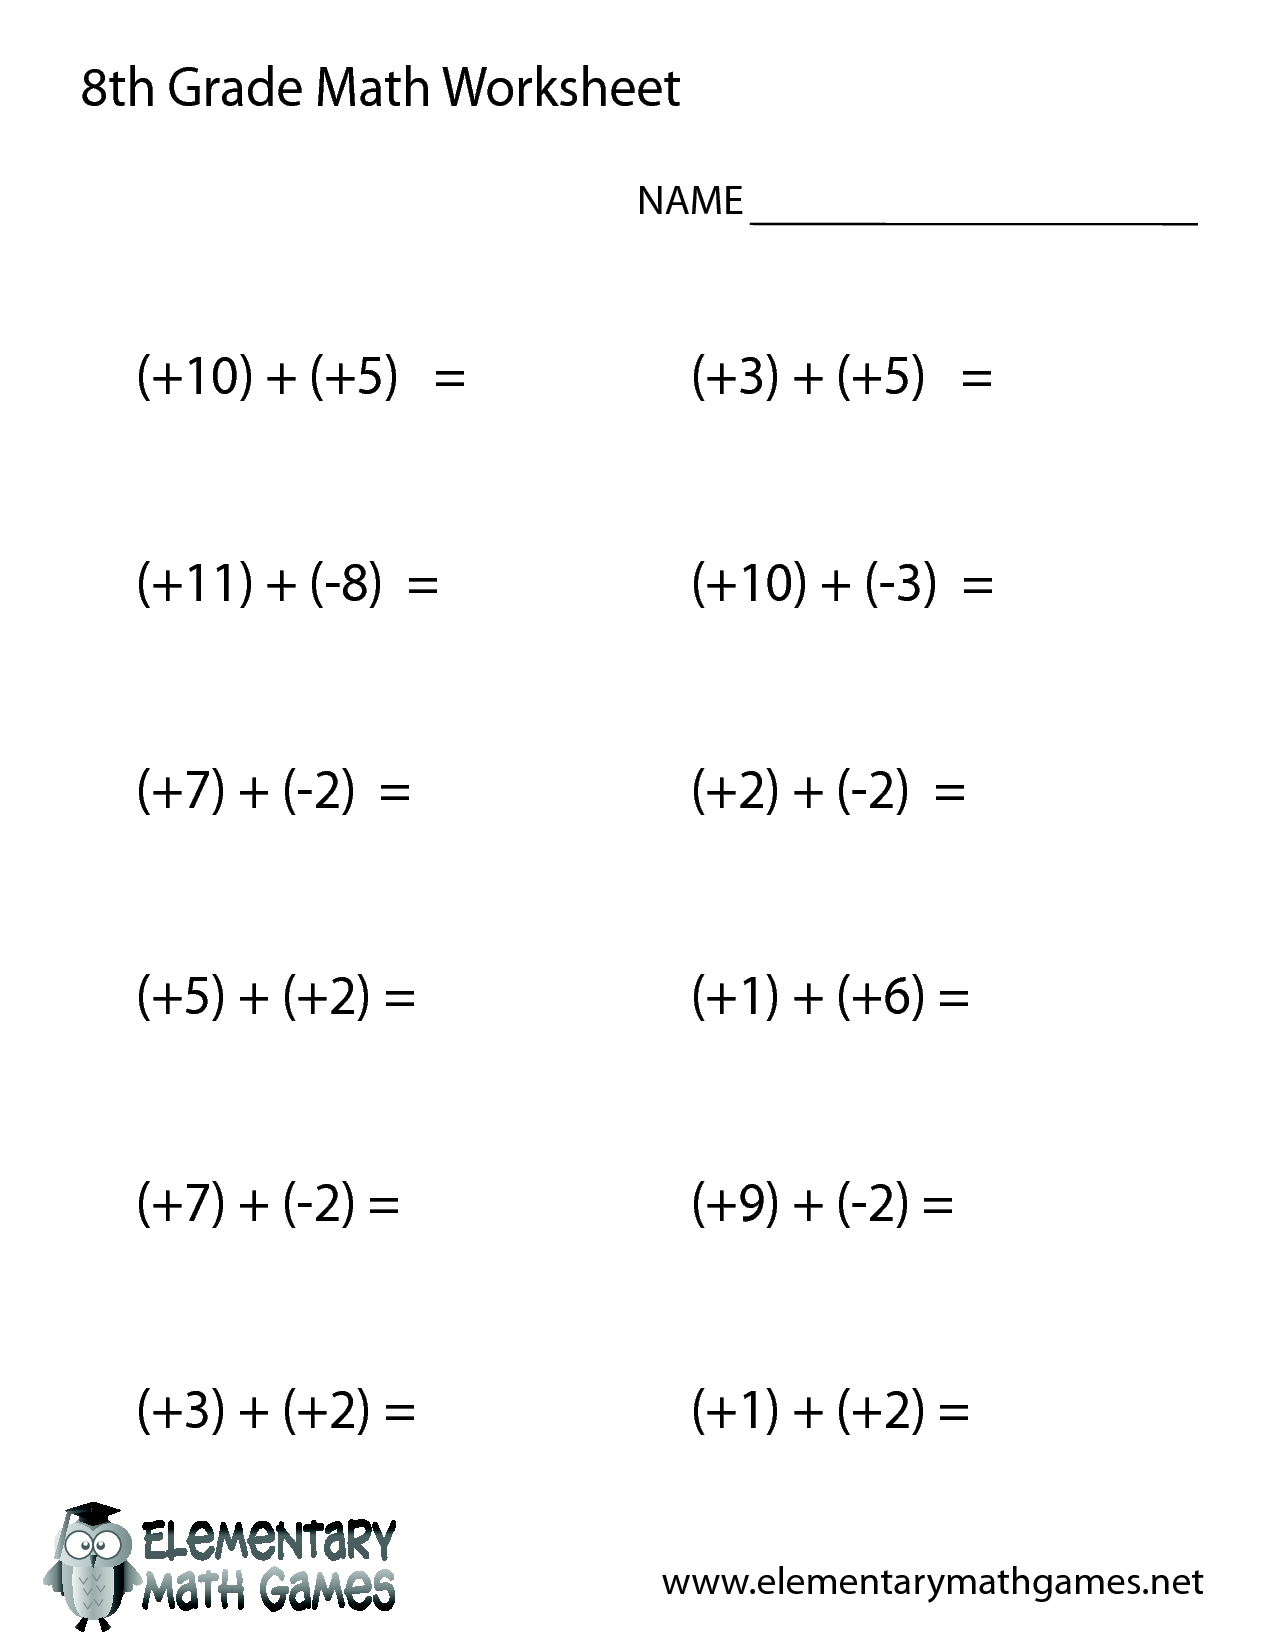 14 Best Images Of 7th Grade Math Worksheets To Print 7th Grade Math Worksheets PDF Math